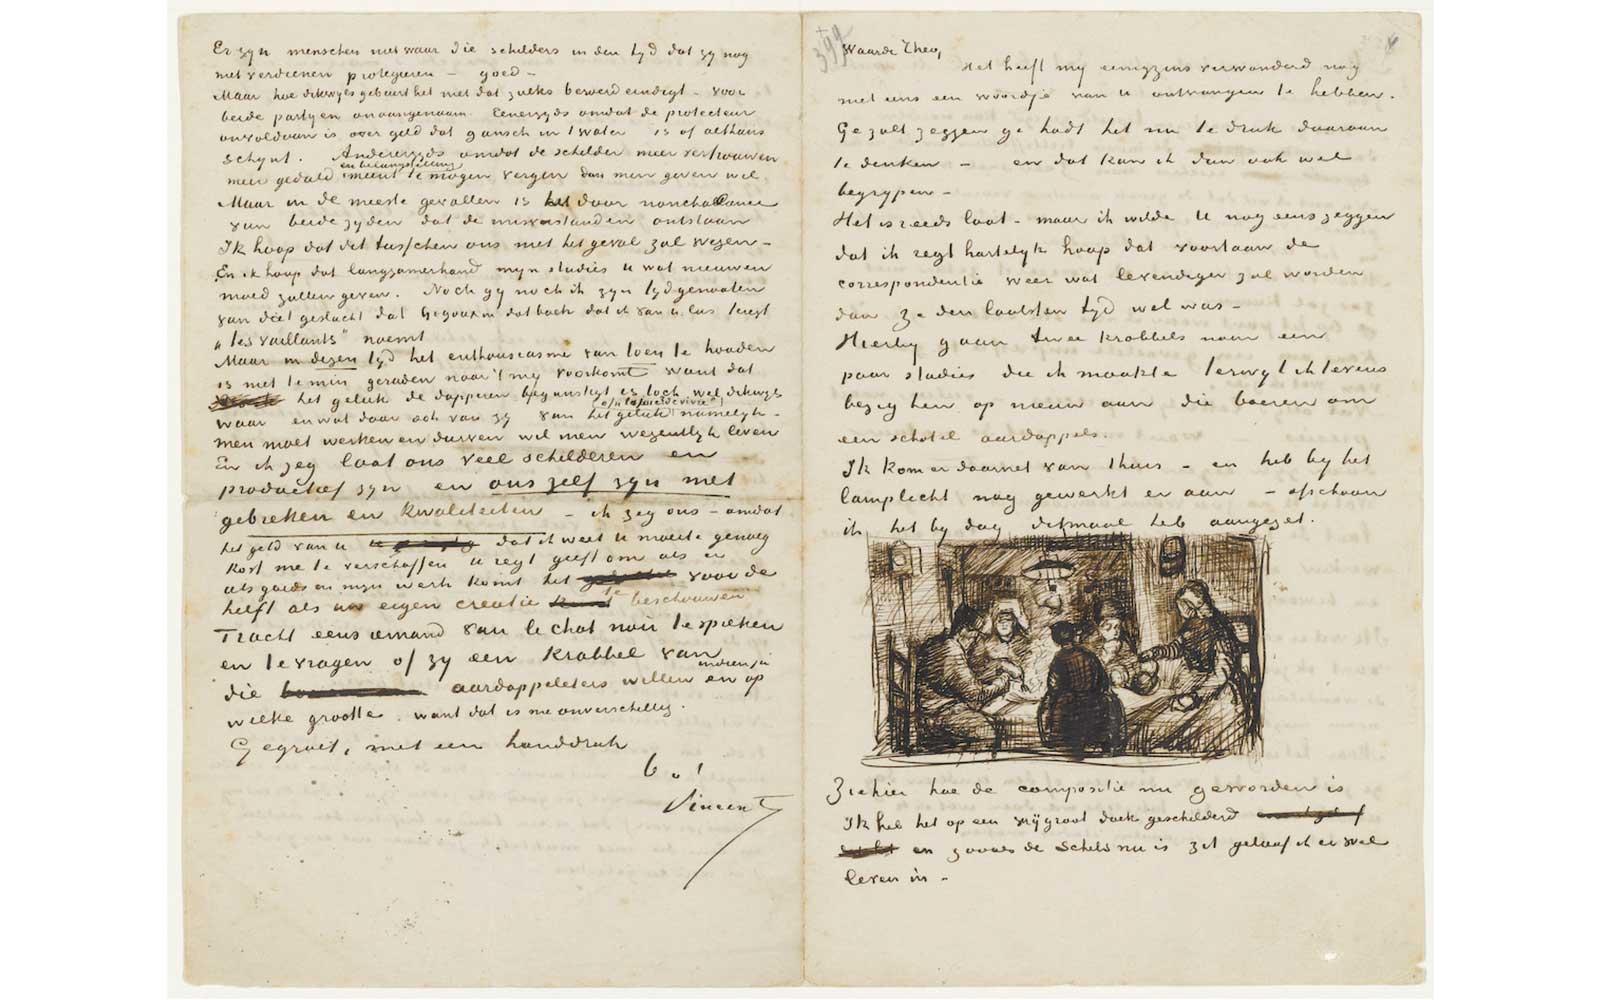 Letter from Vincent Van Gogh to Theo Van Gogh, 9 April,1885.